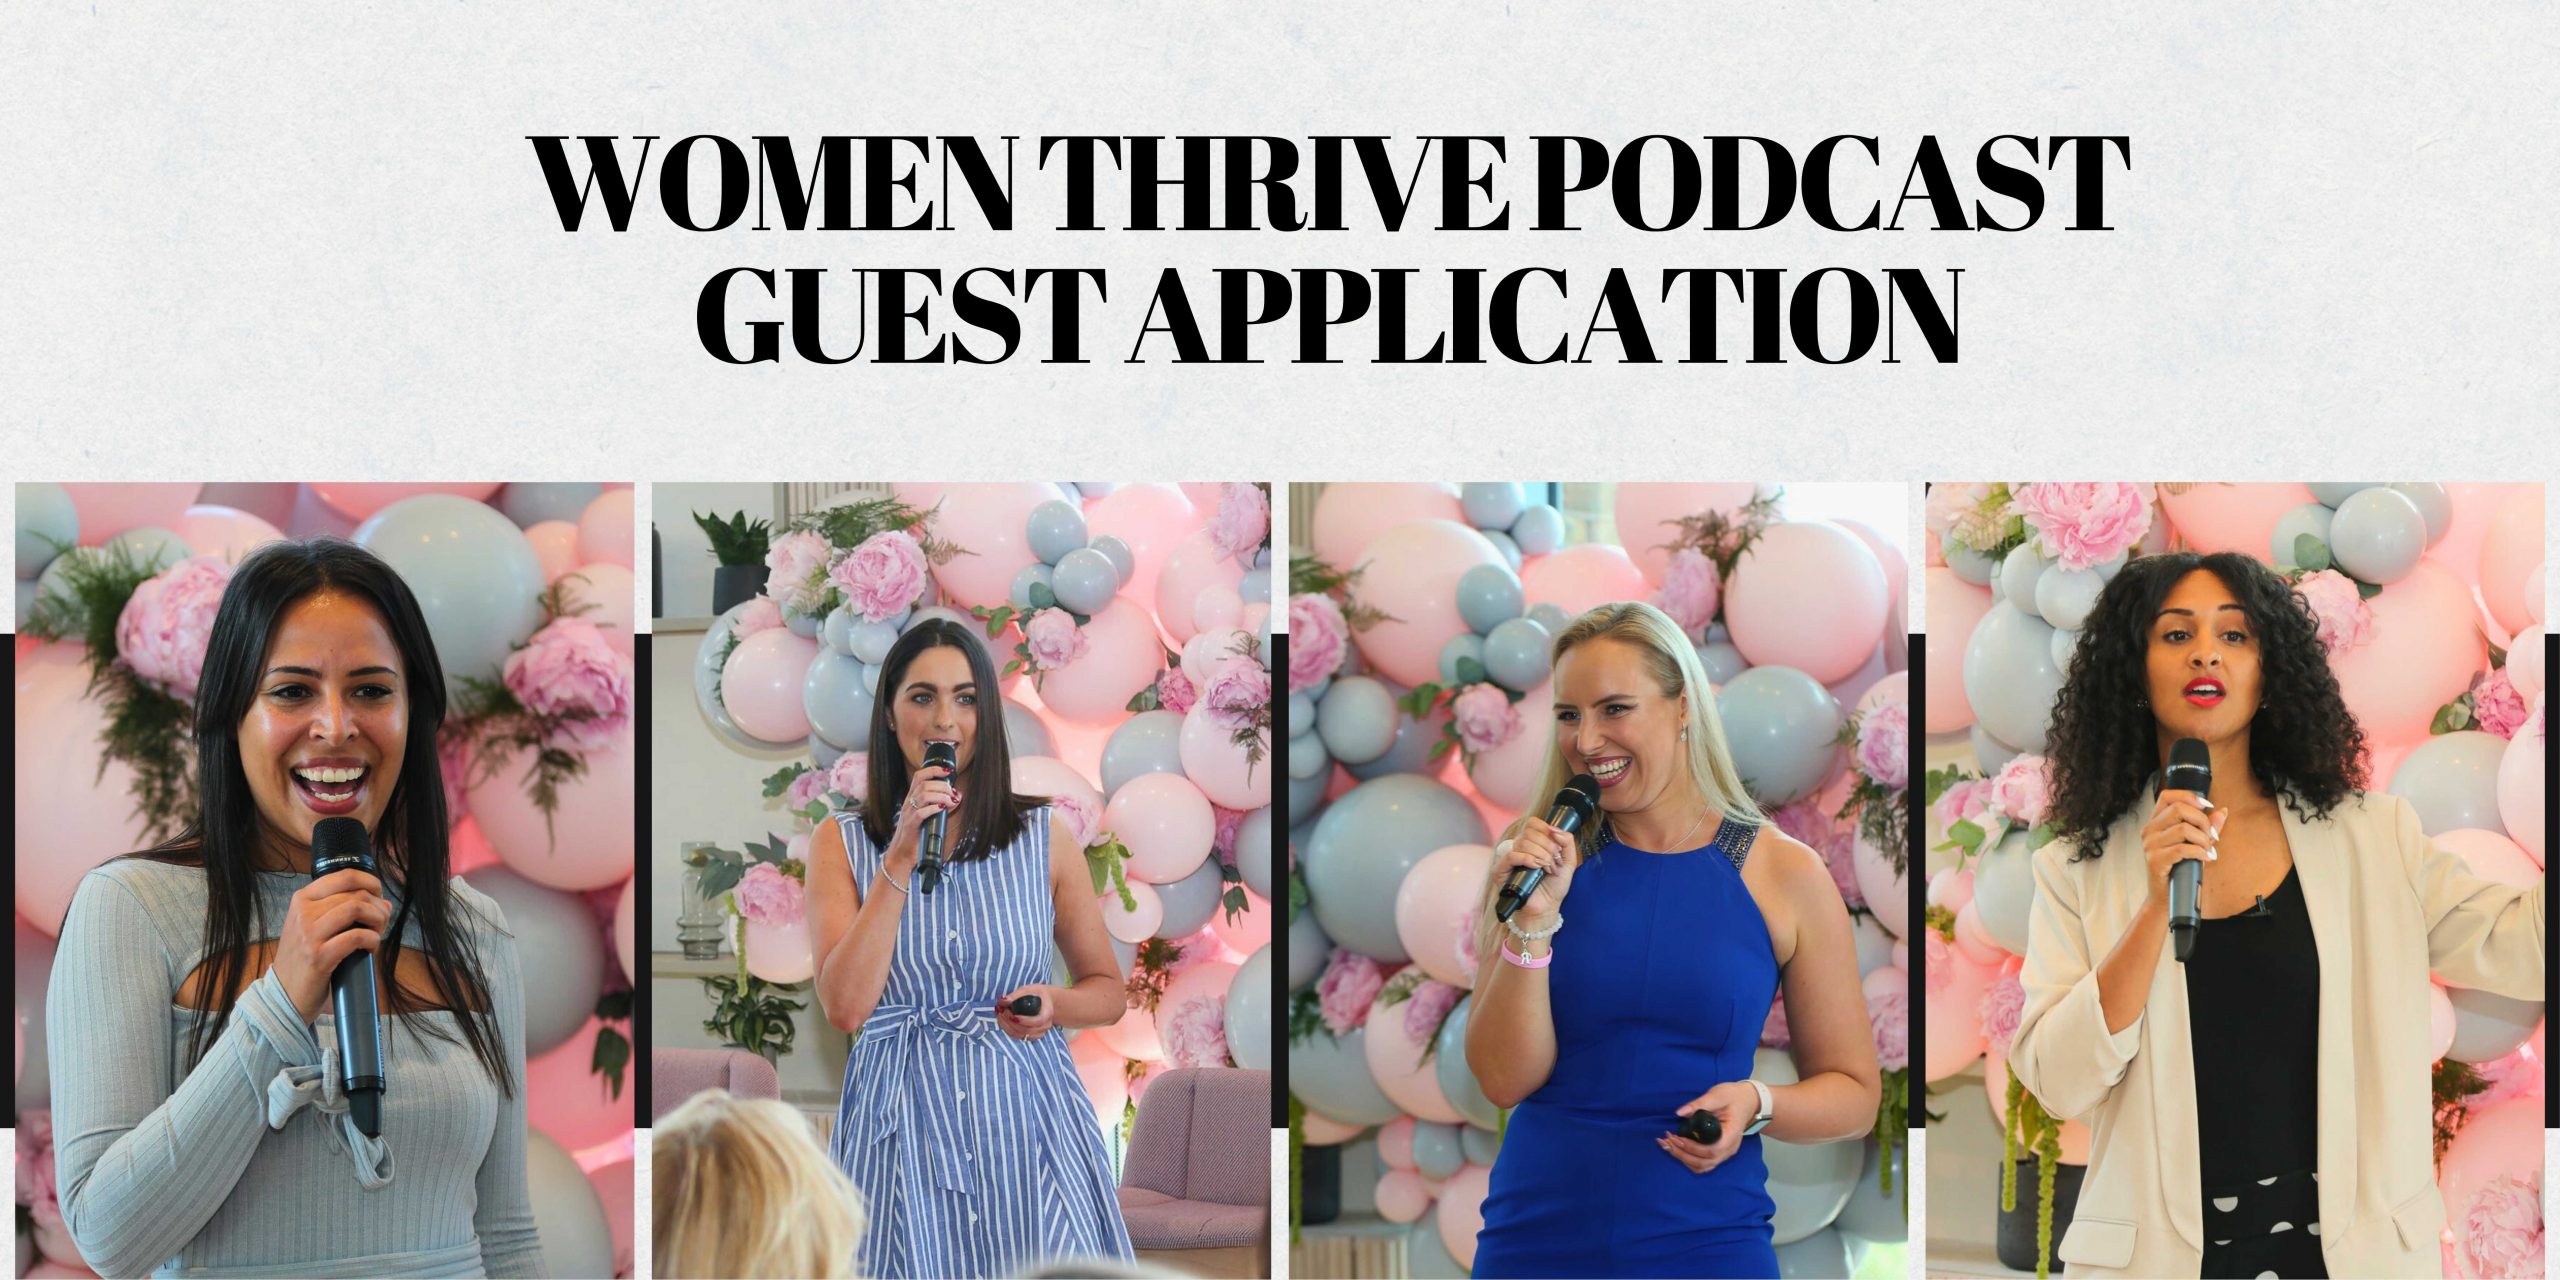 WOMEN THRIVE PODCAST GUEST APPLICATION